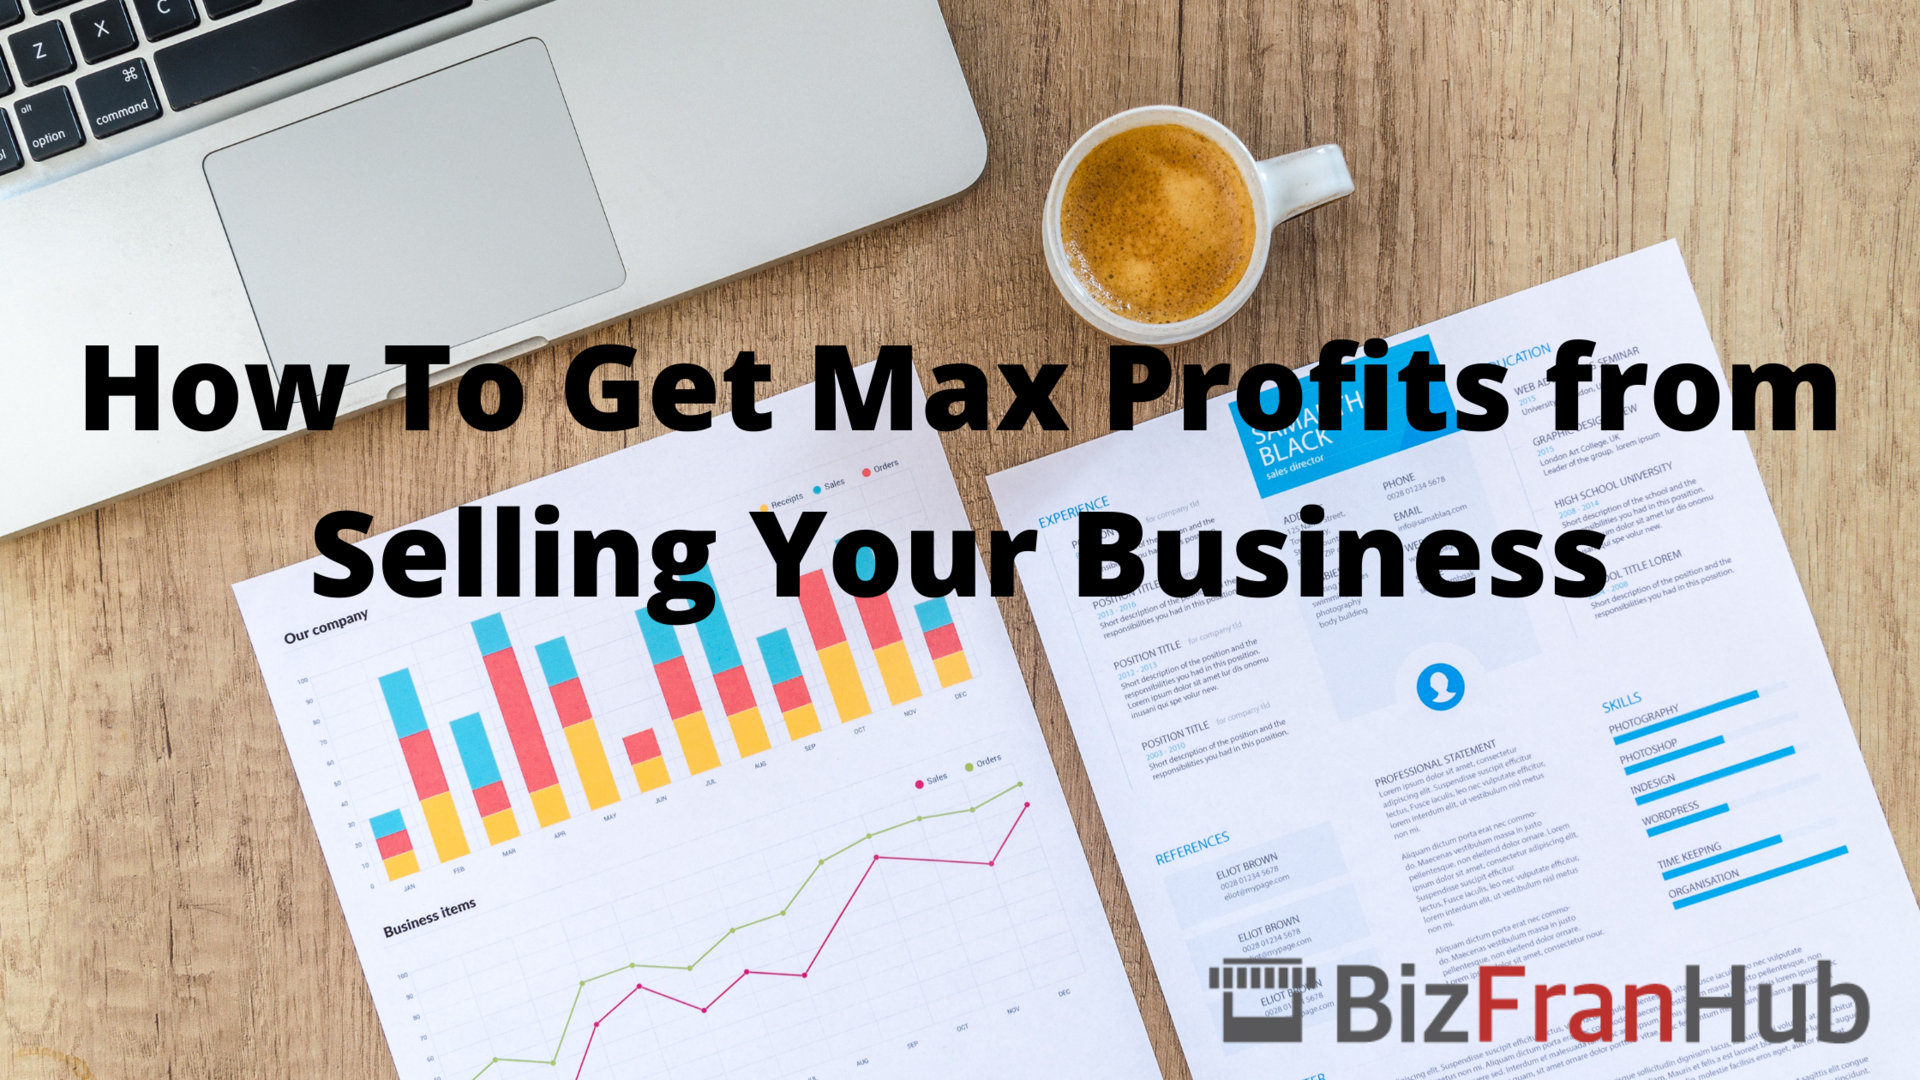 How To Get Max Profits from Selling Your Business